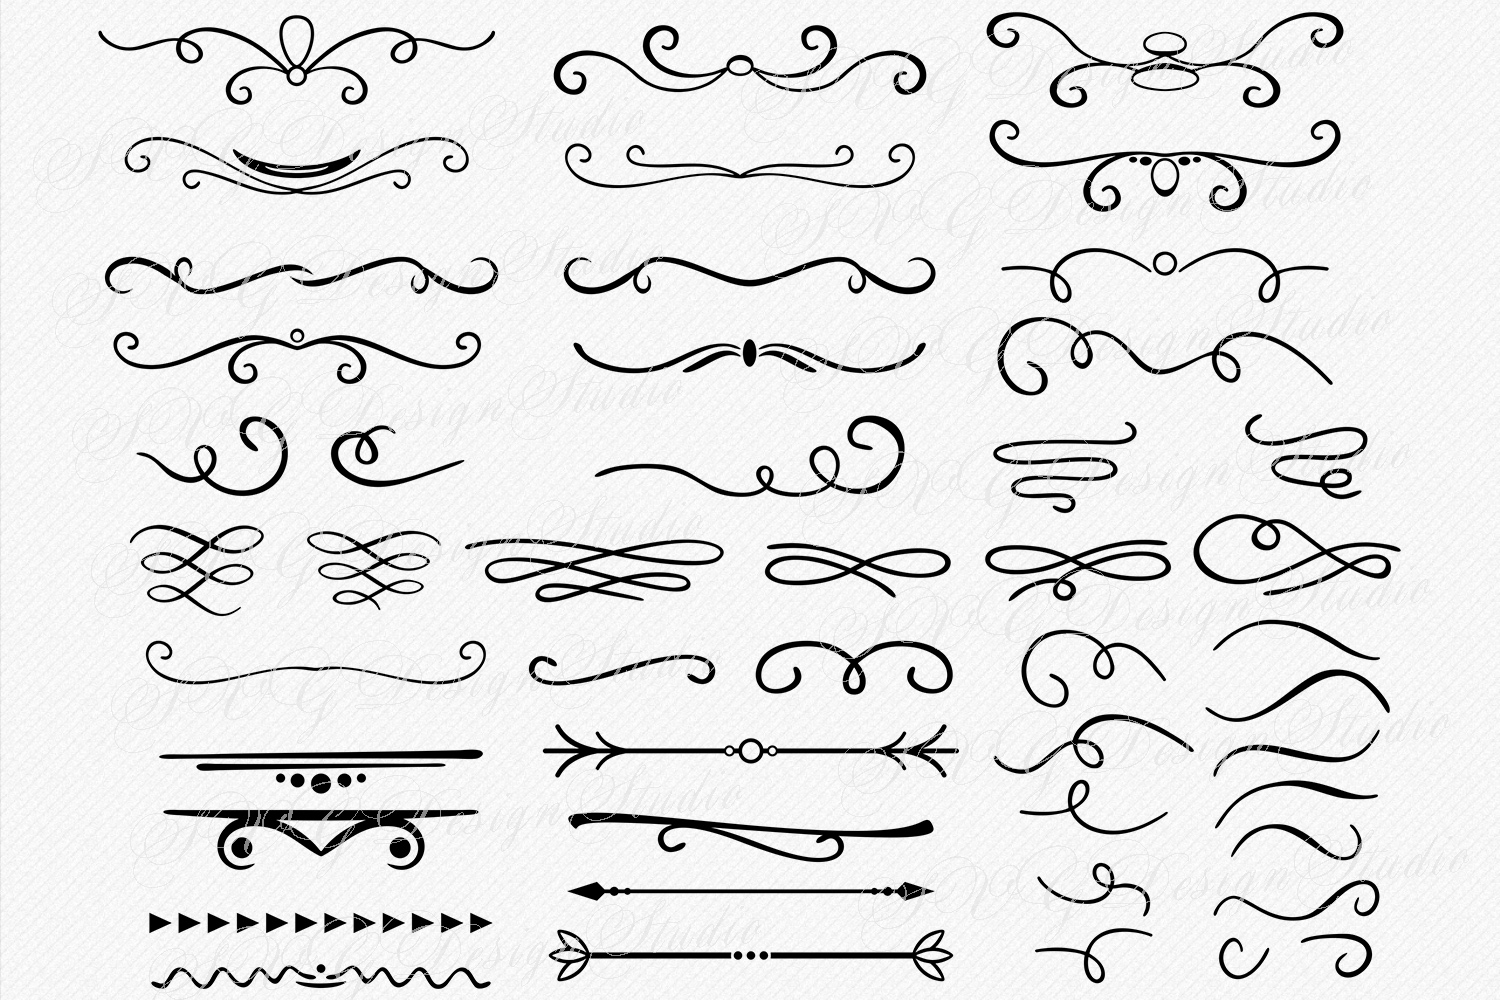 47 Text Dividers vector, Borders SVG - Swirls svg (197925 ...